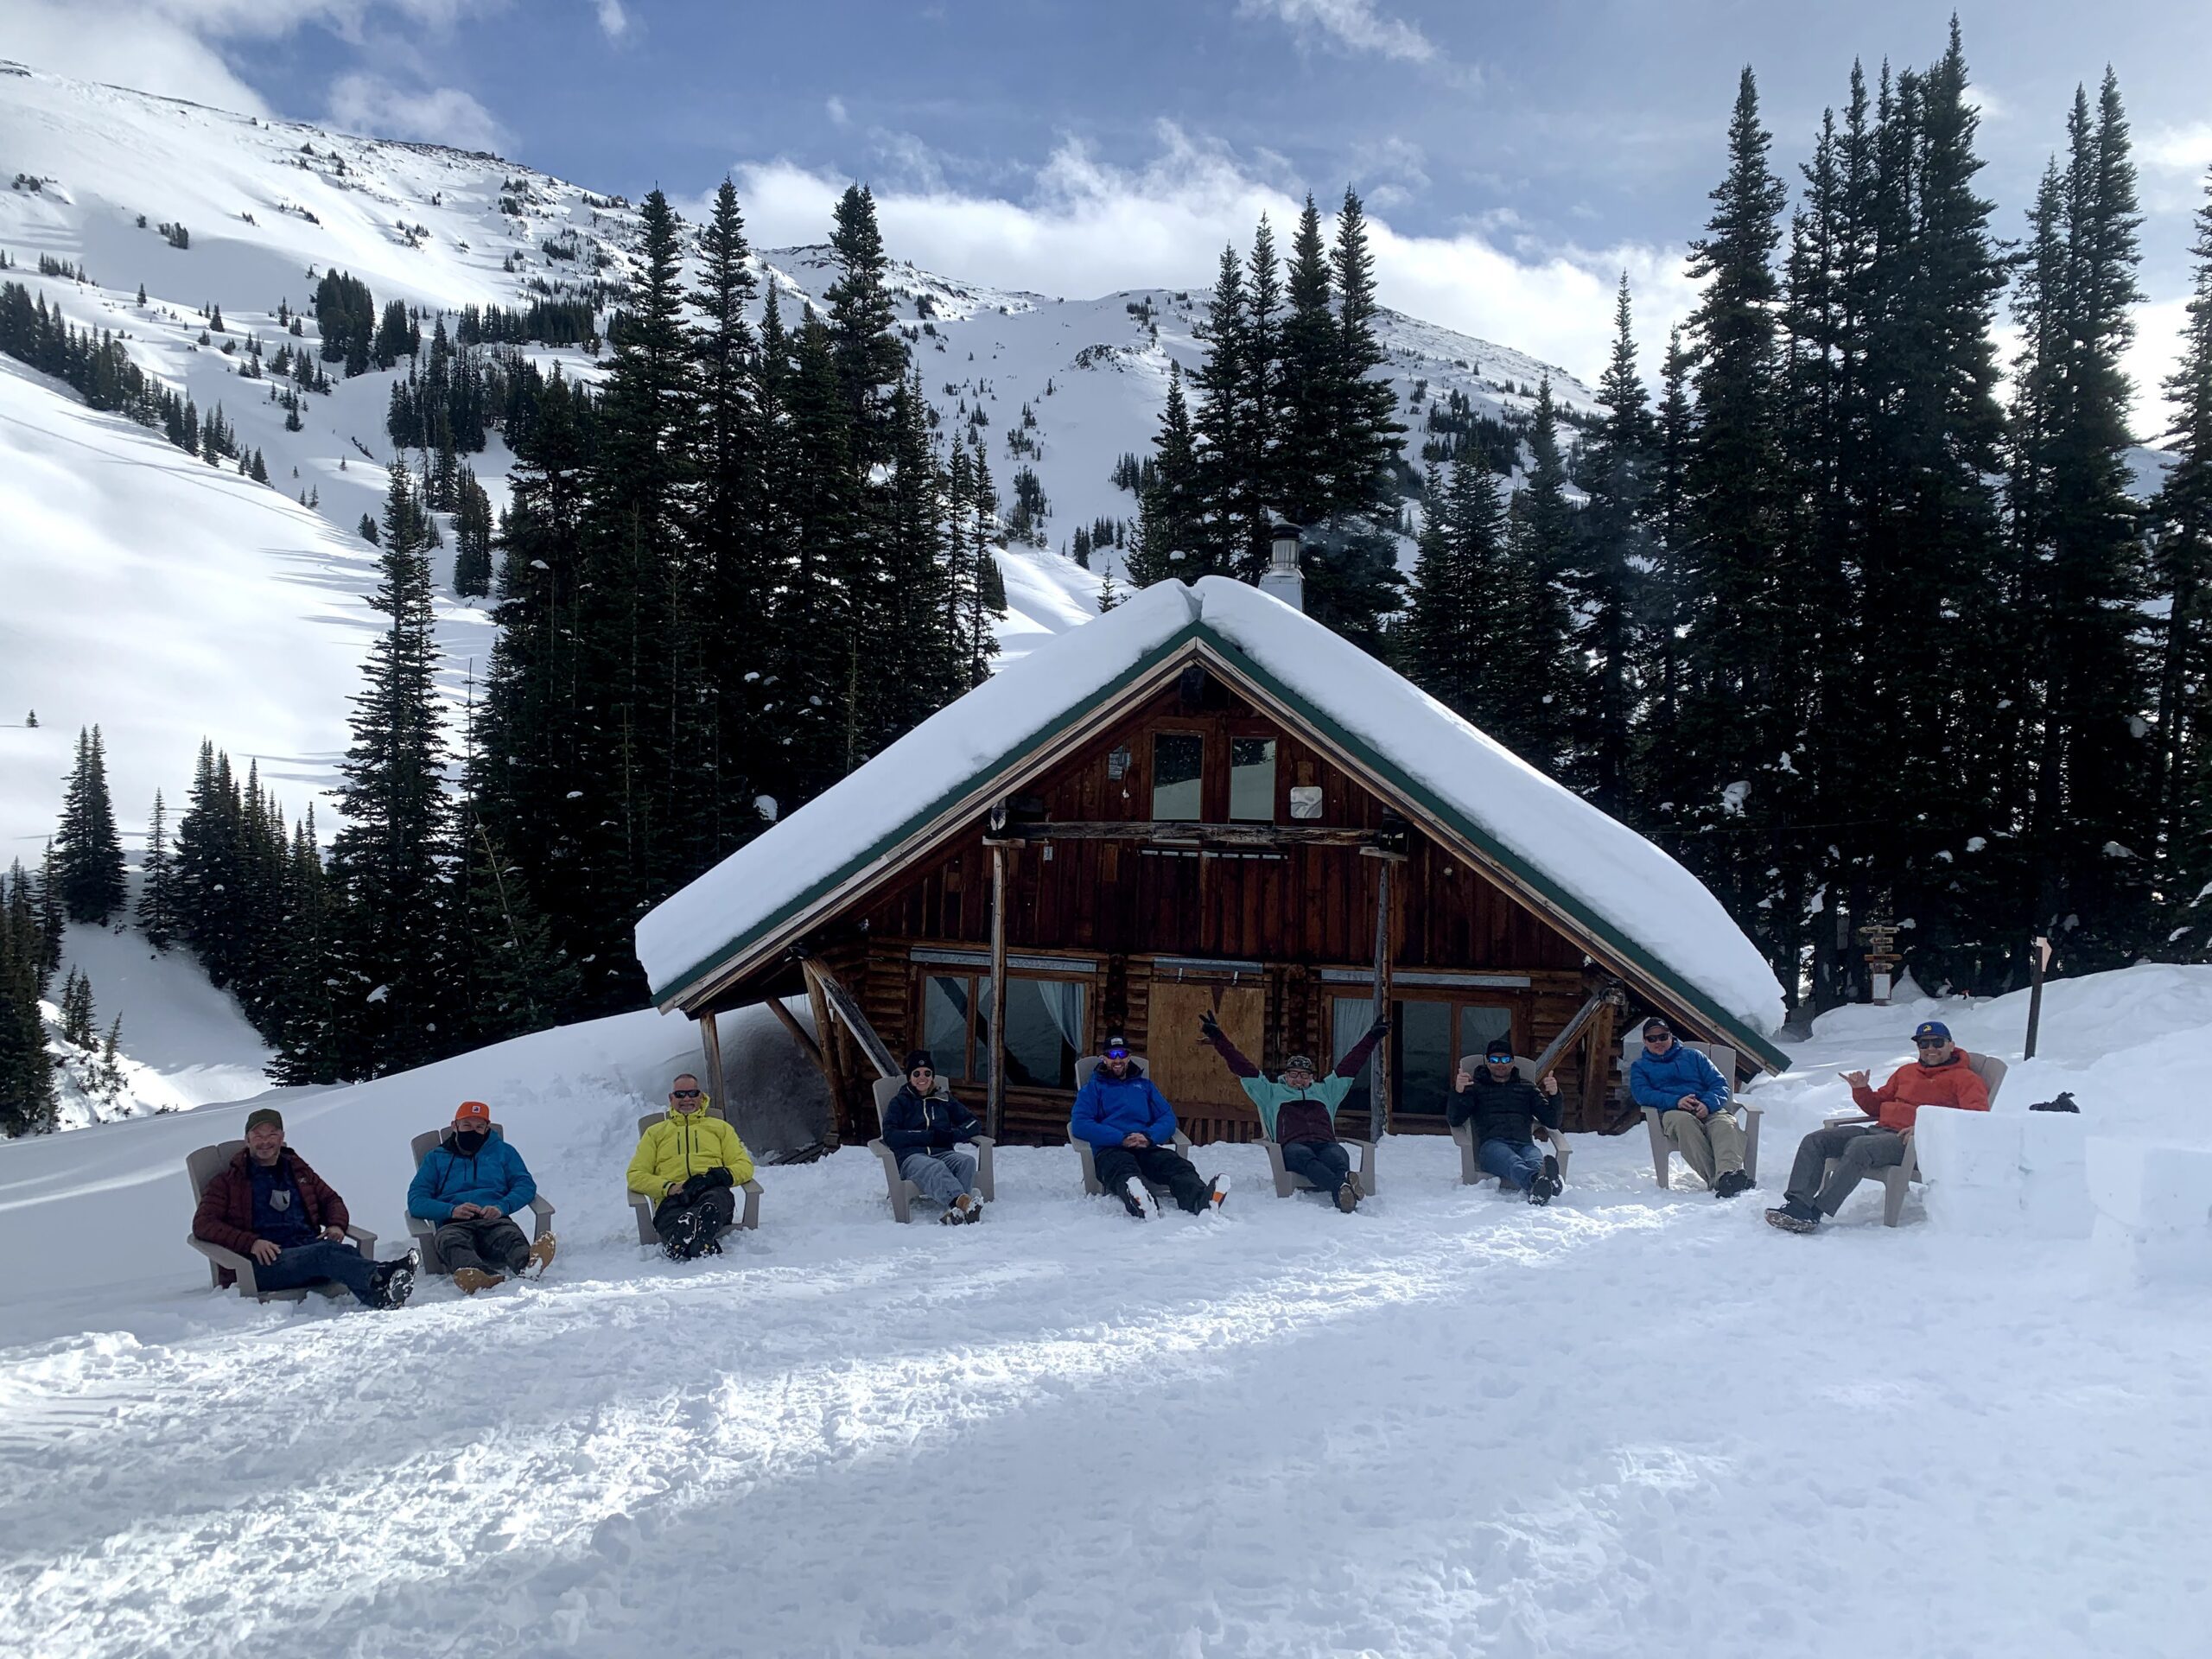 Ski Touring From A Backcountry Lodge In British Columbia - Mabey Ski